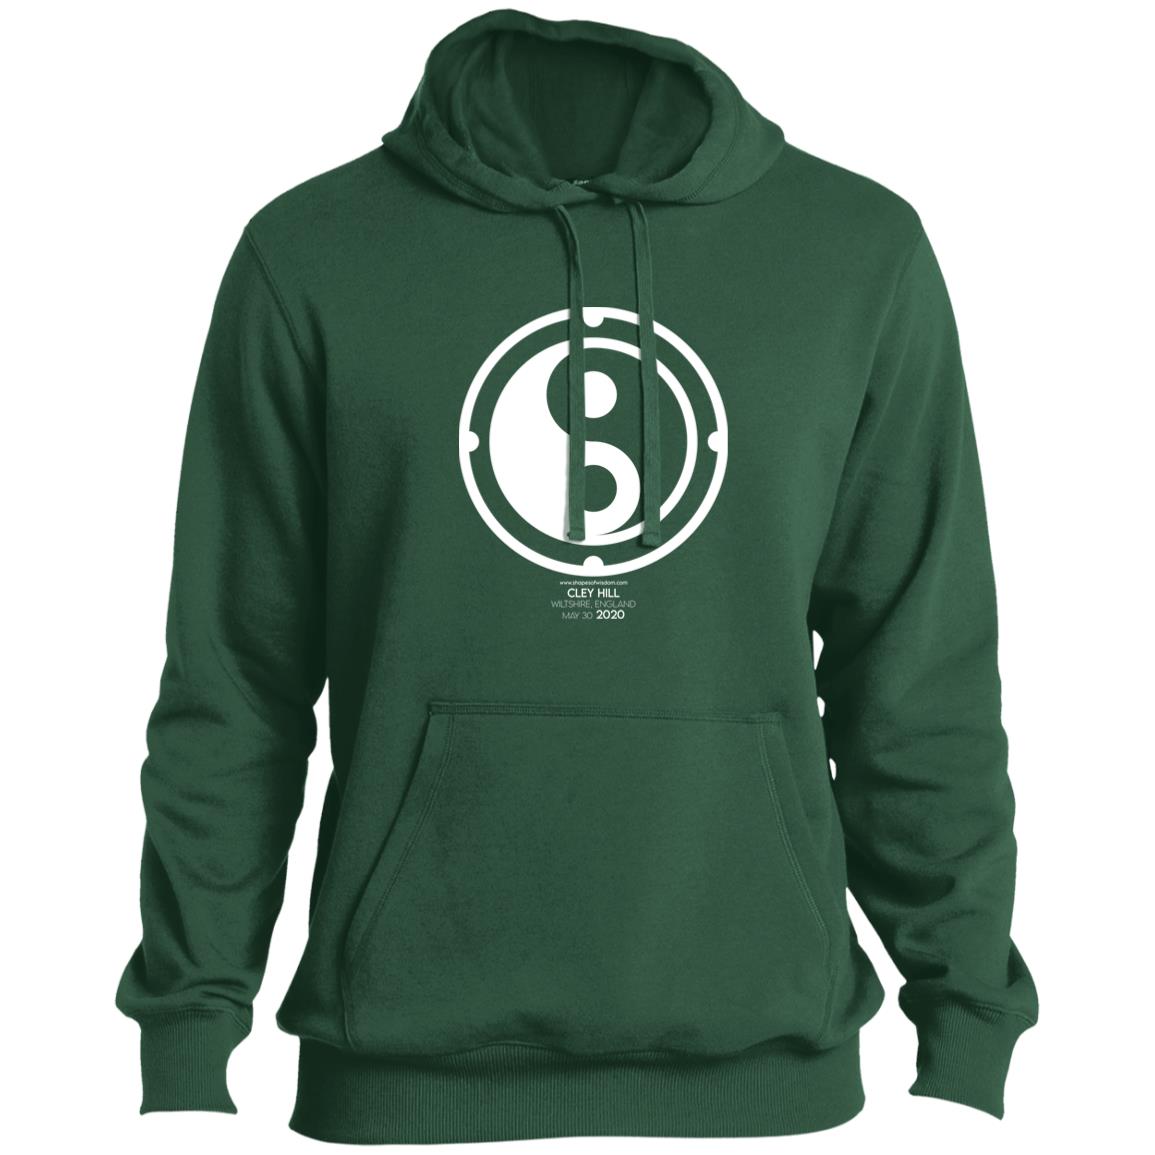 Crop Circle Pullover Hoodie - Cley Hill 4